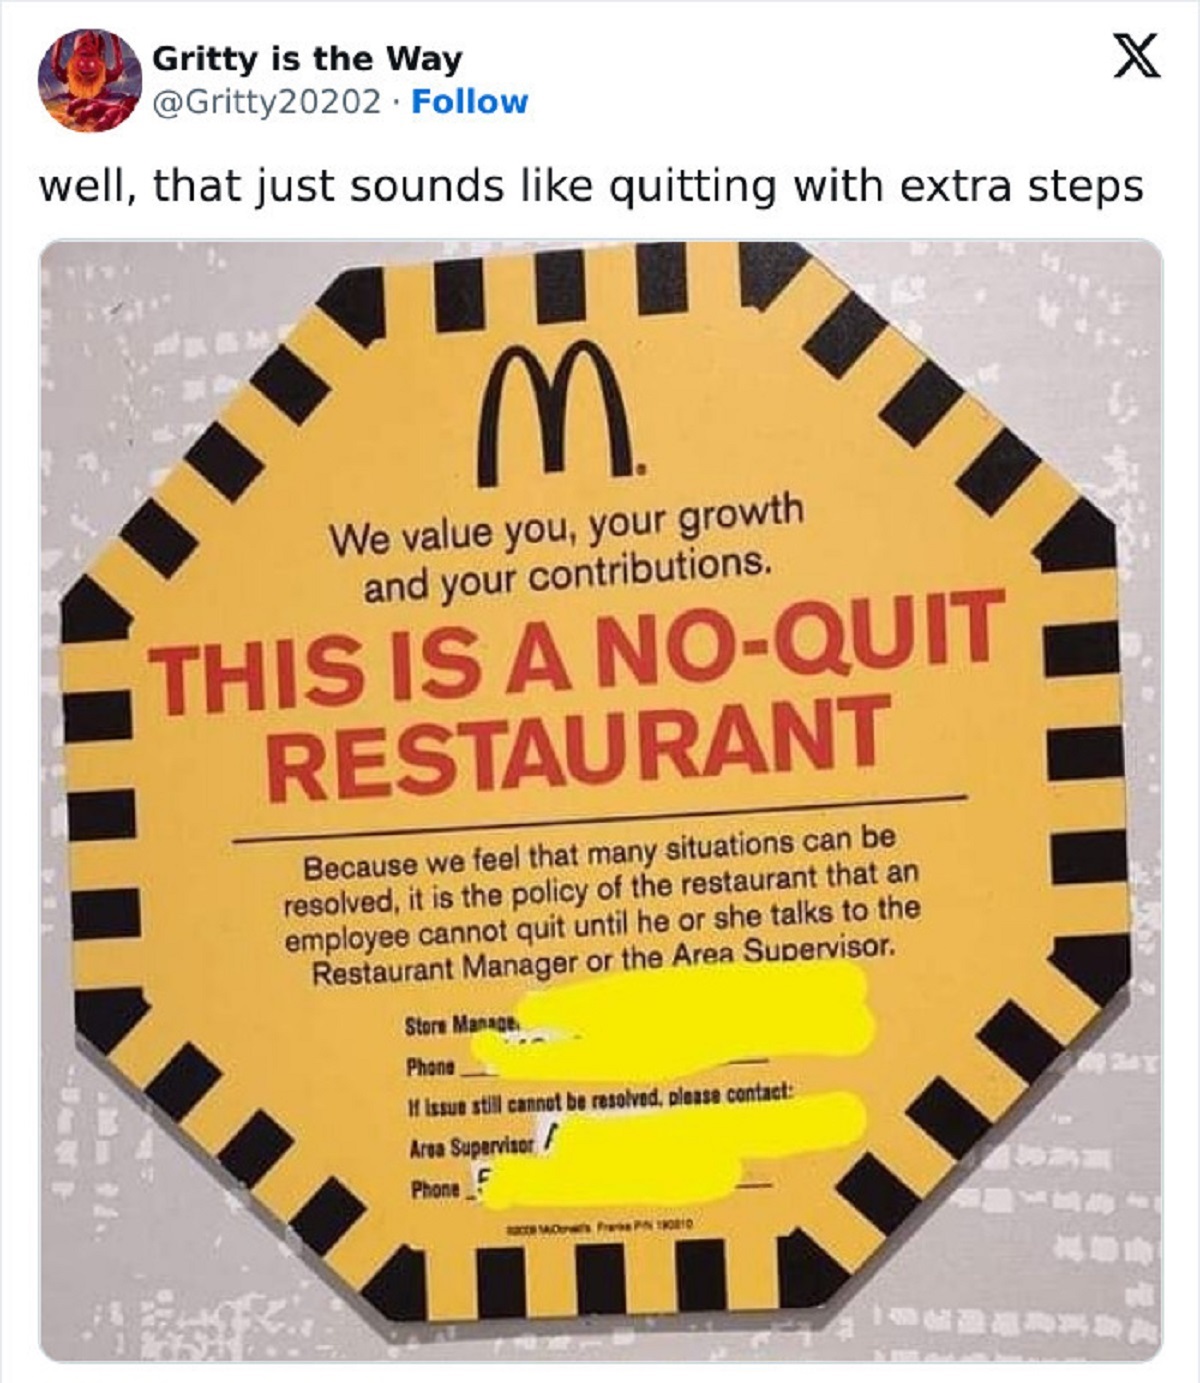 mcdonald's no quit policy - Am Sp Gritty is the Way X well, that just sounds quitting with extra steps M We value you, your growth and your contributions. This Is A NoQuit Restaurant Because we feel that many situations can be resolved, it is the policy o